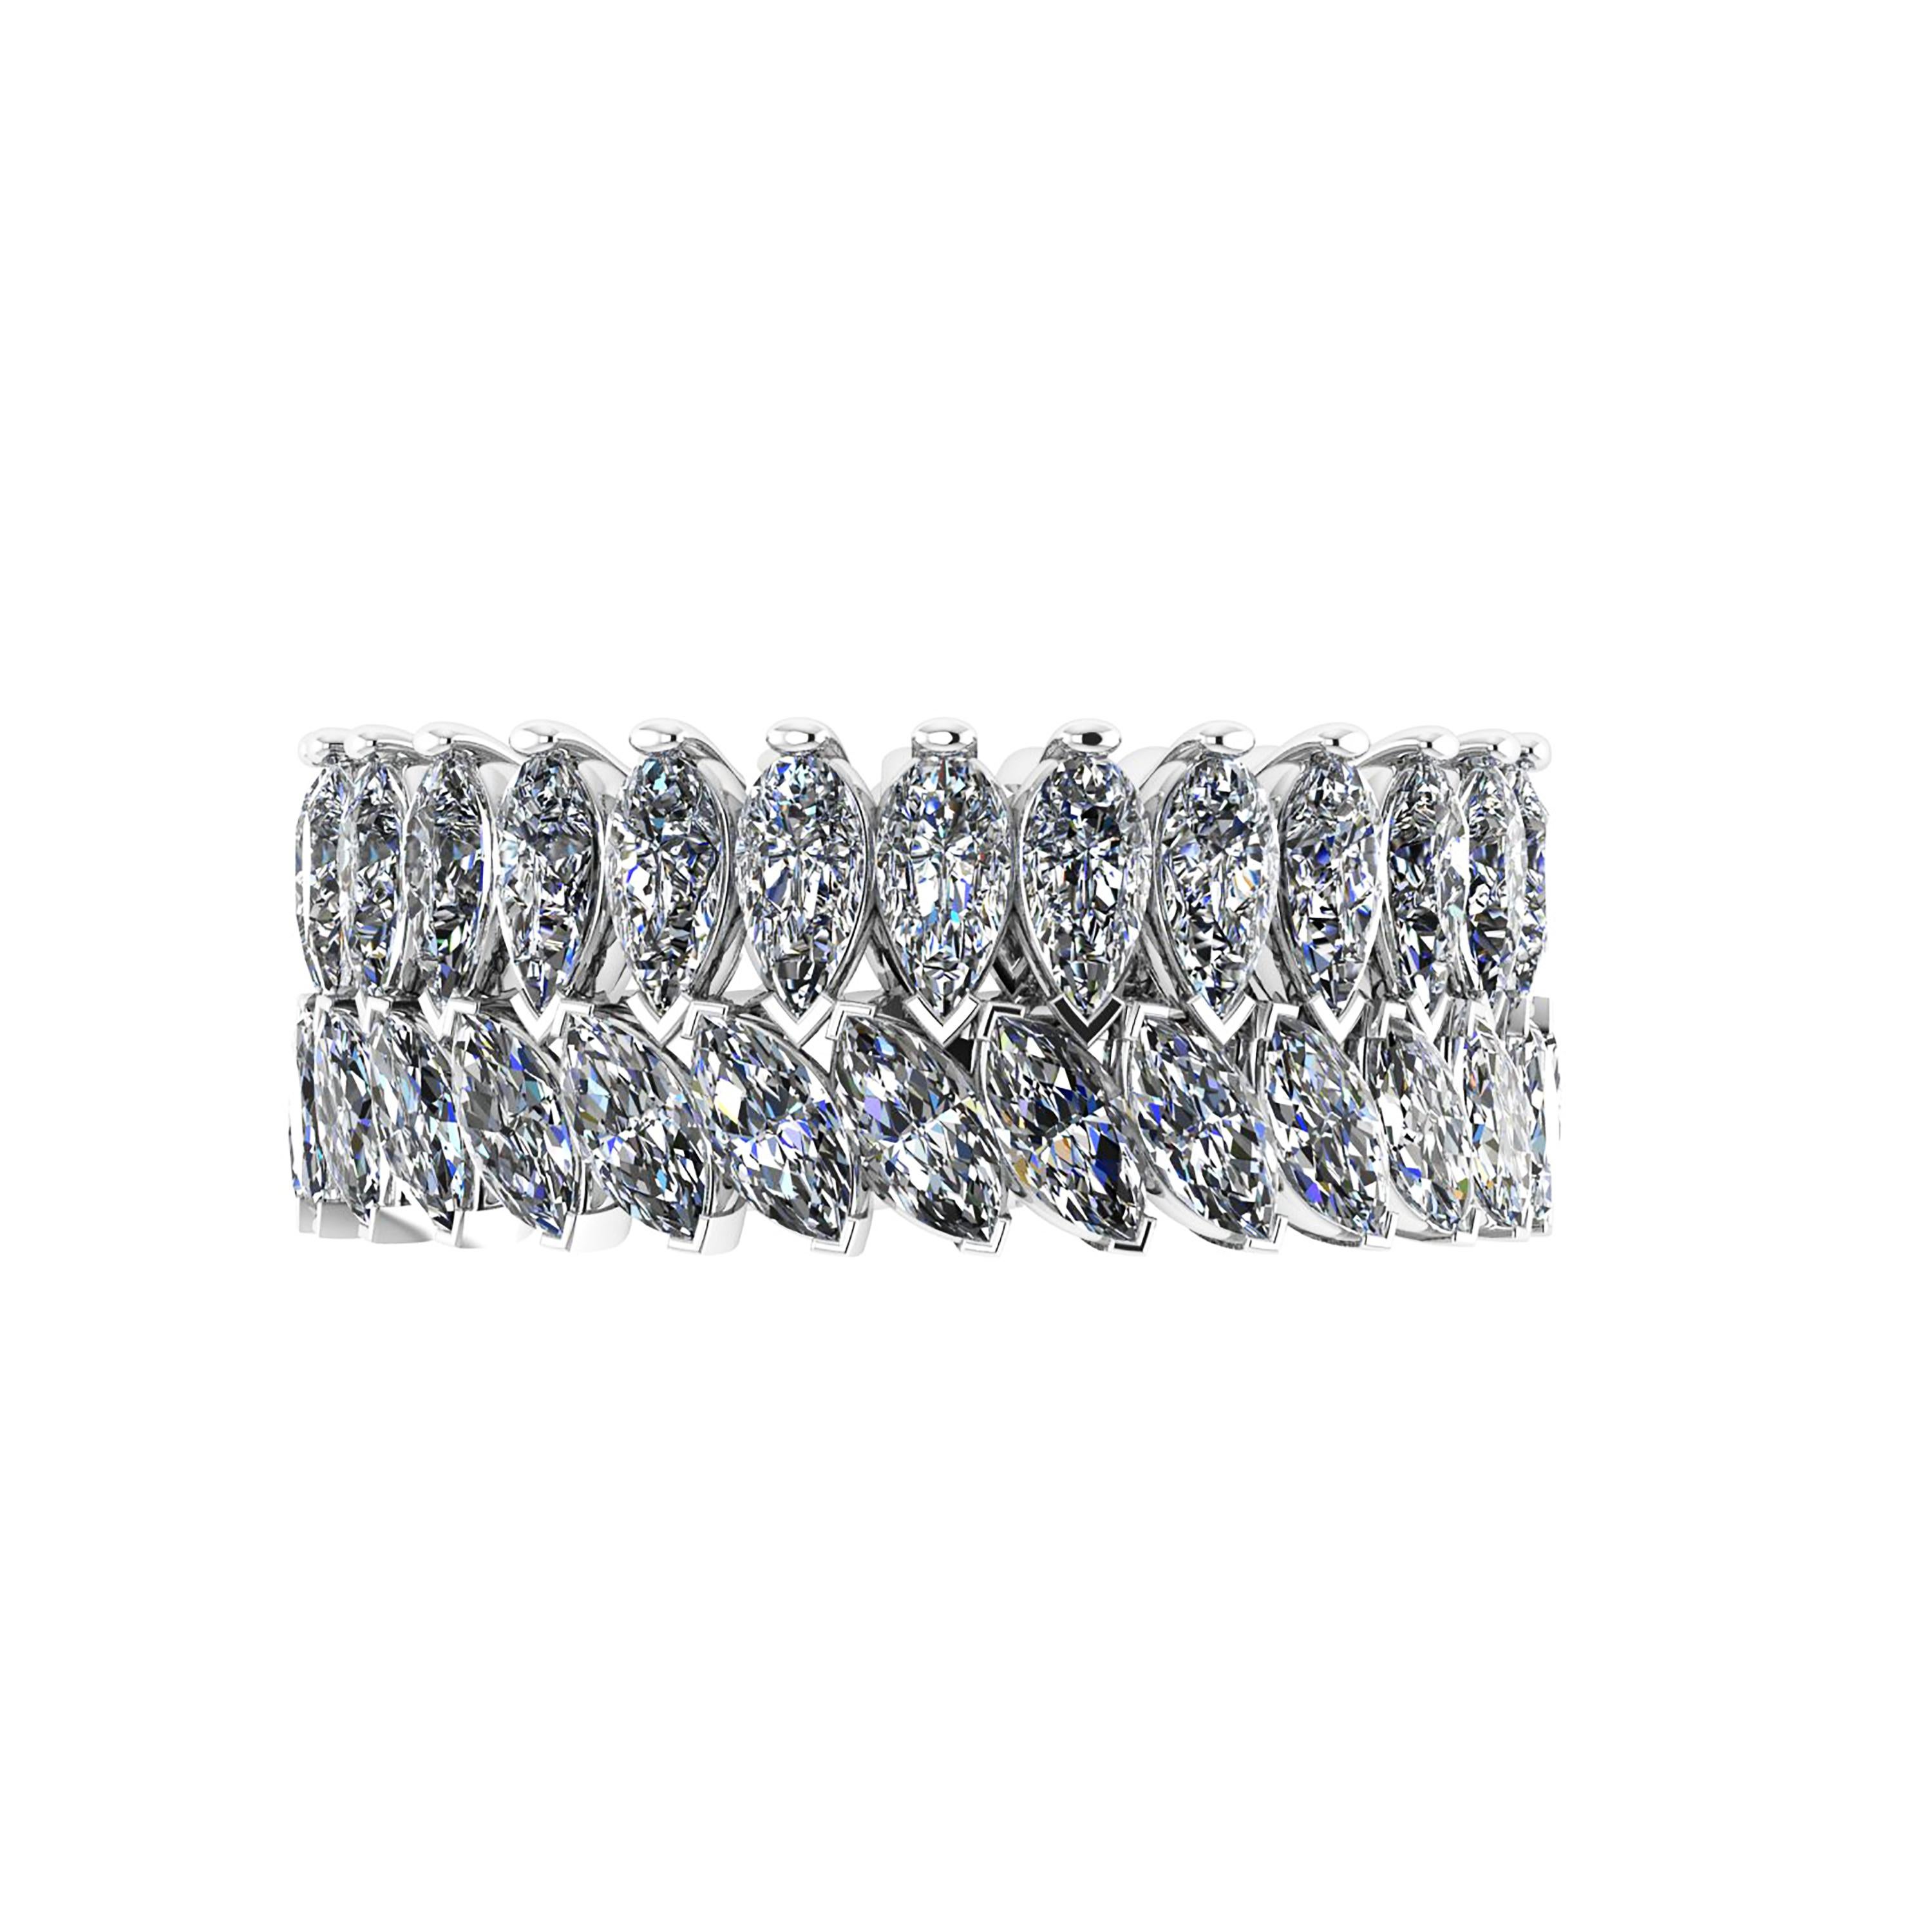 A classic FERRUCCI 3.55 carat of bright white diamonds G color, SI+++ clarity, marquise and pear shape cuts, set to perfection in a hand crafted, Platinum 950 eternity band, 8 mm wide, stackable collection, made in New York with the best Italian